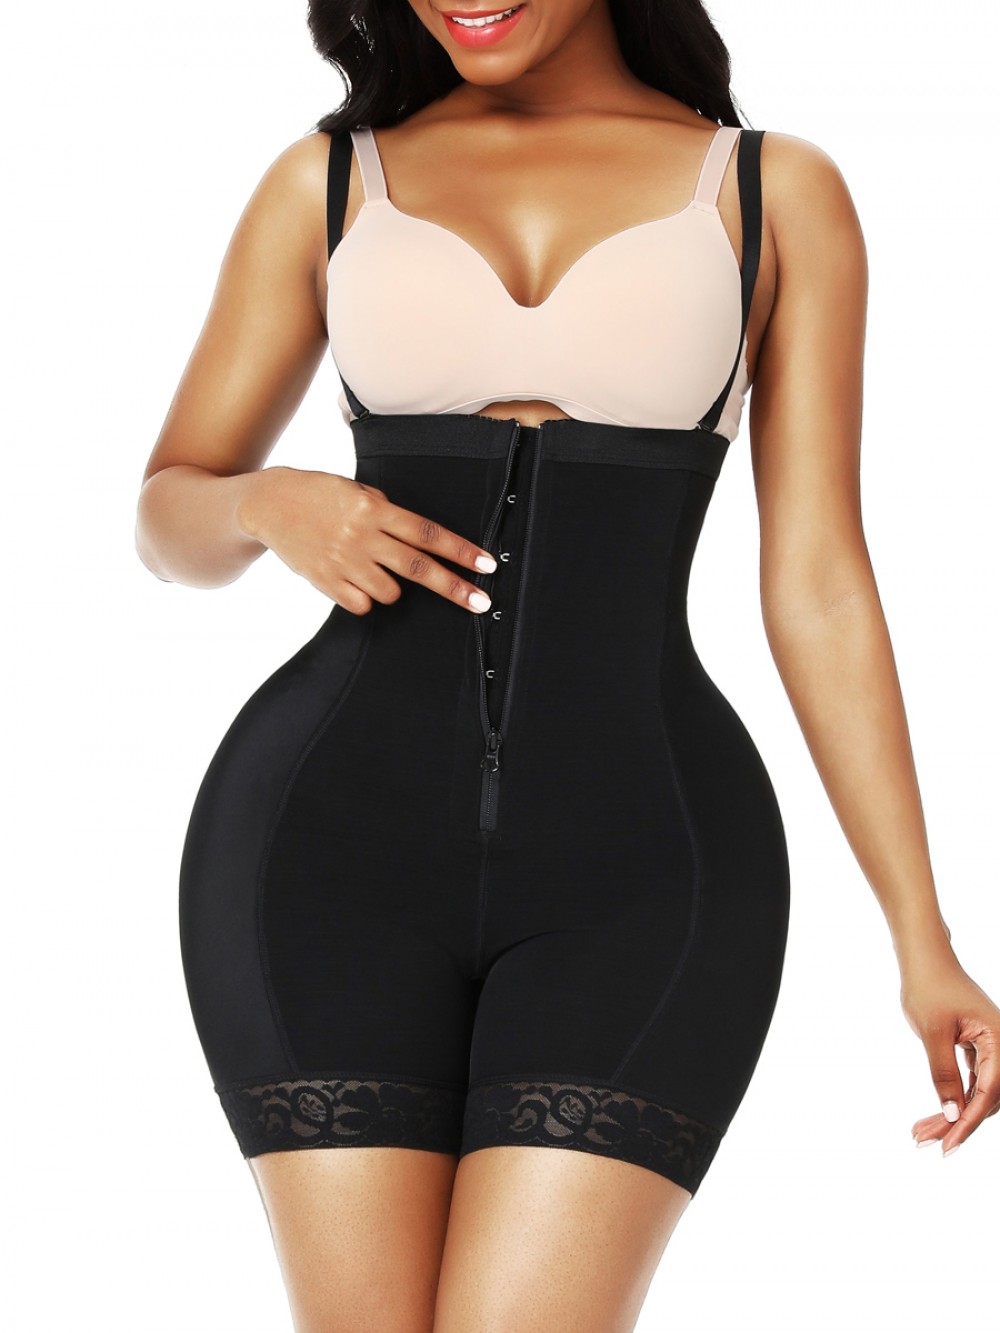 Butt Lifter Black High Waist Lace Removable Pads Firm Compression